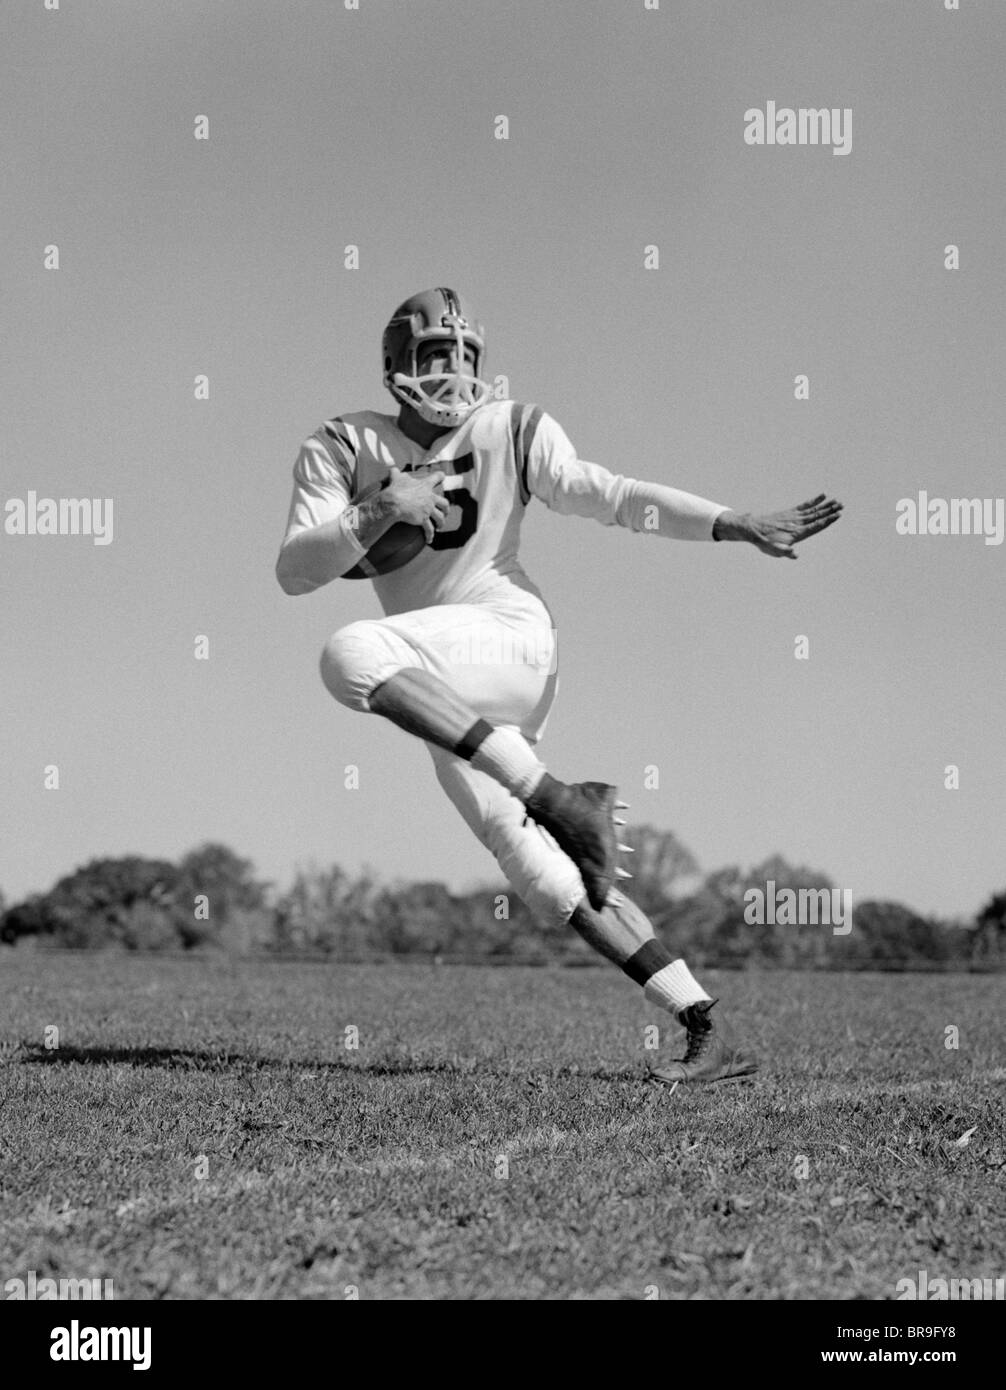 1960 JEUNE HOMME FOOTBALL PLAYER RUNNING WITH BALL Banque D'Images